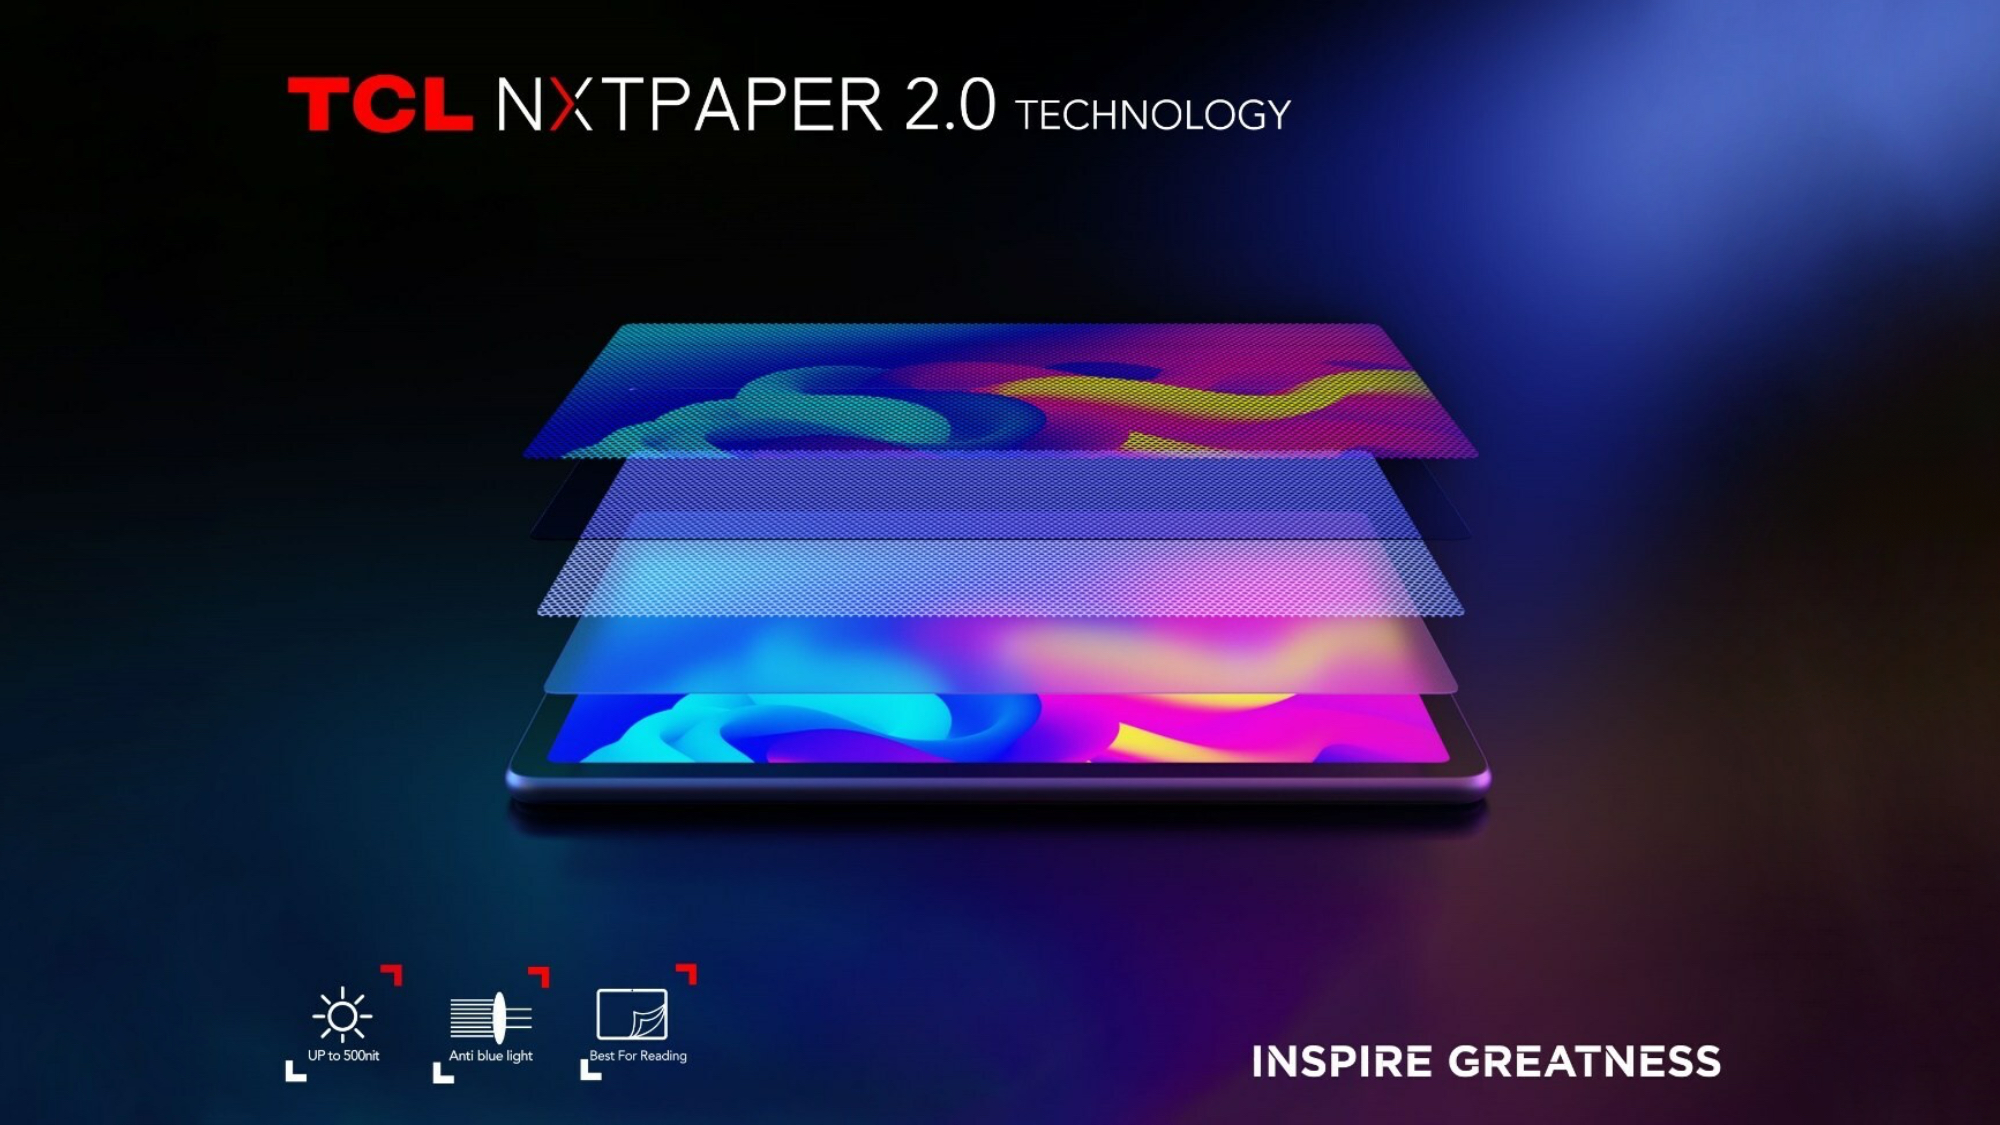 Promo TCL NXTPAPER 2.0